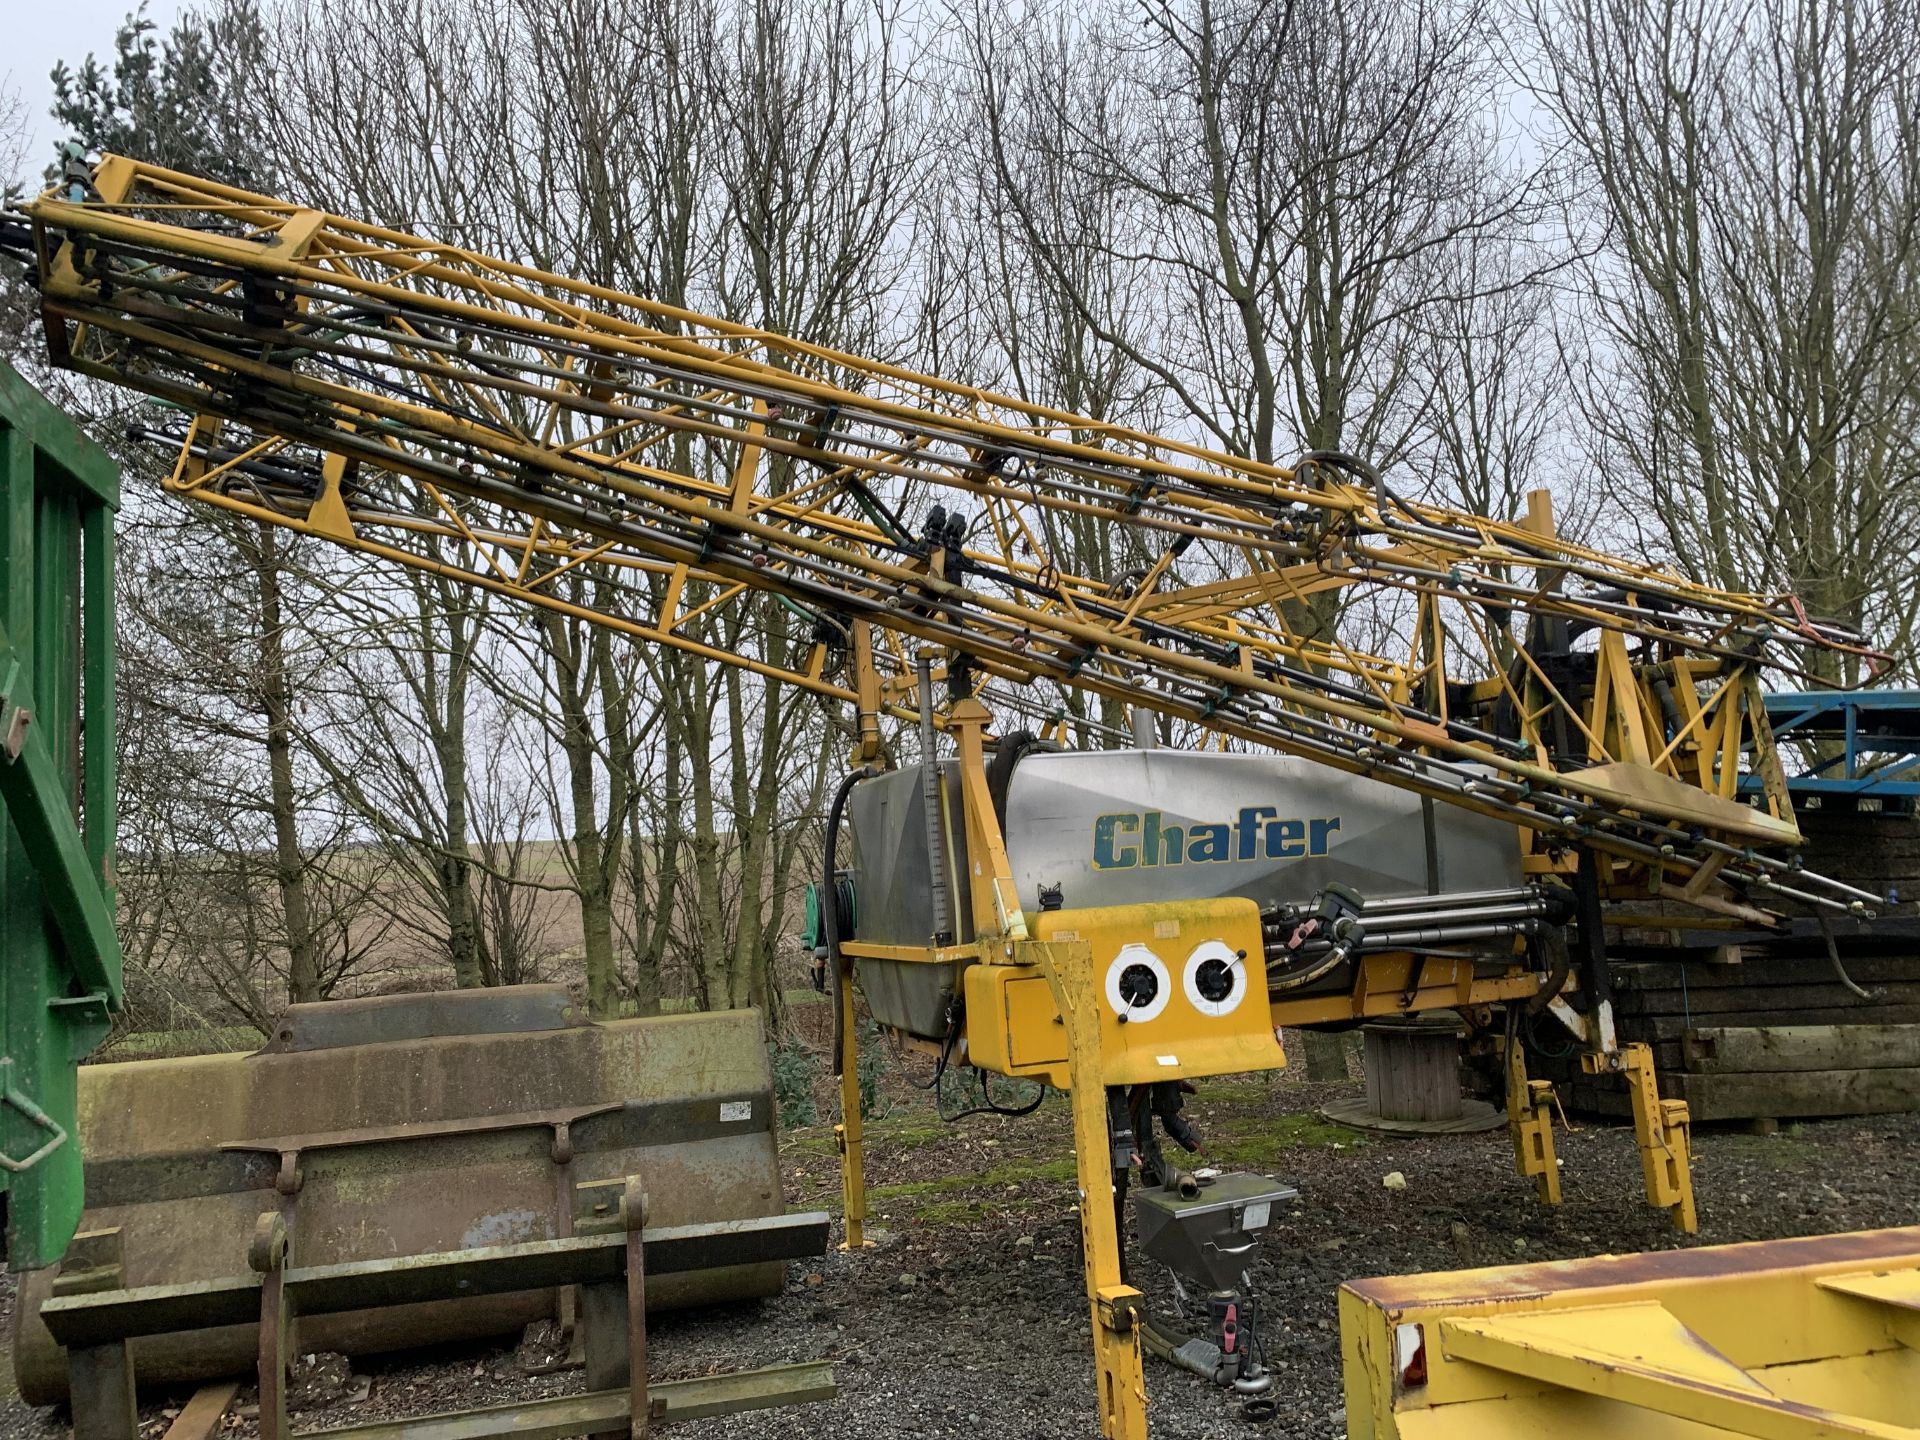 Chafer 3000l demount sprayer, 30m boom, section control, twin lines, with control box